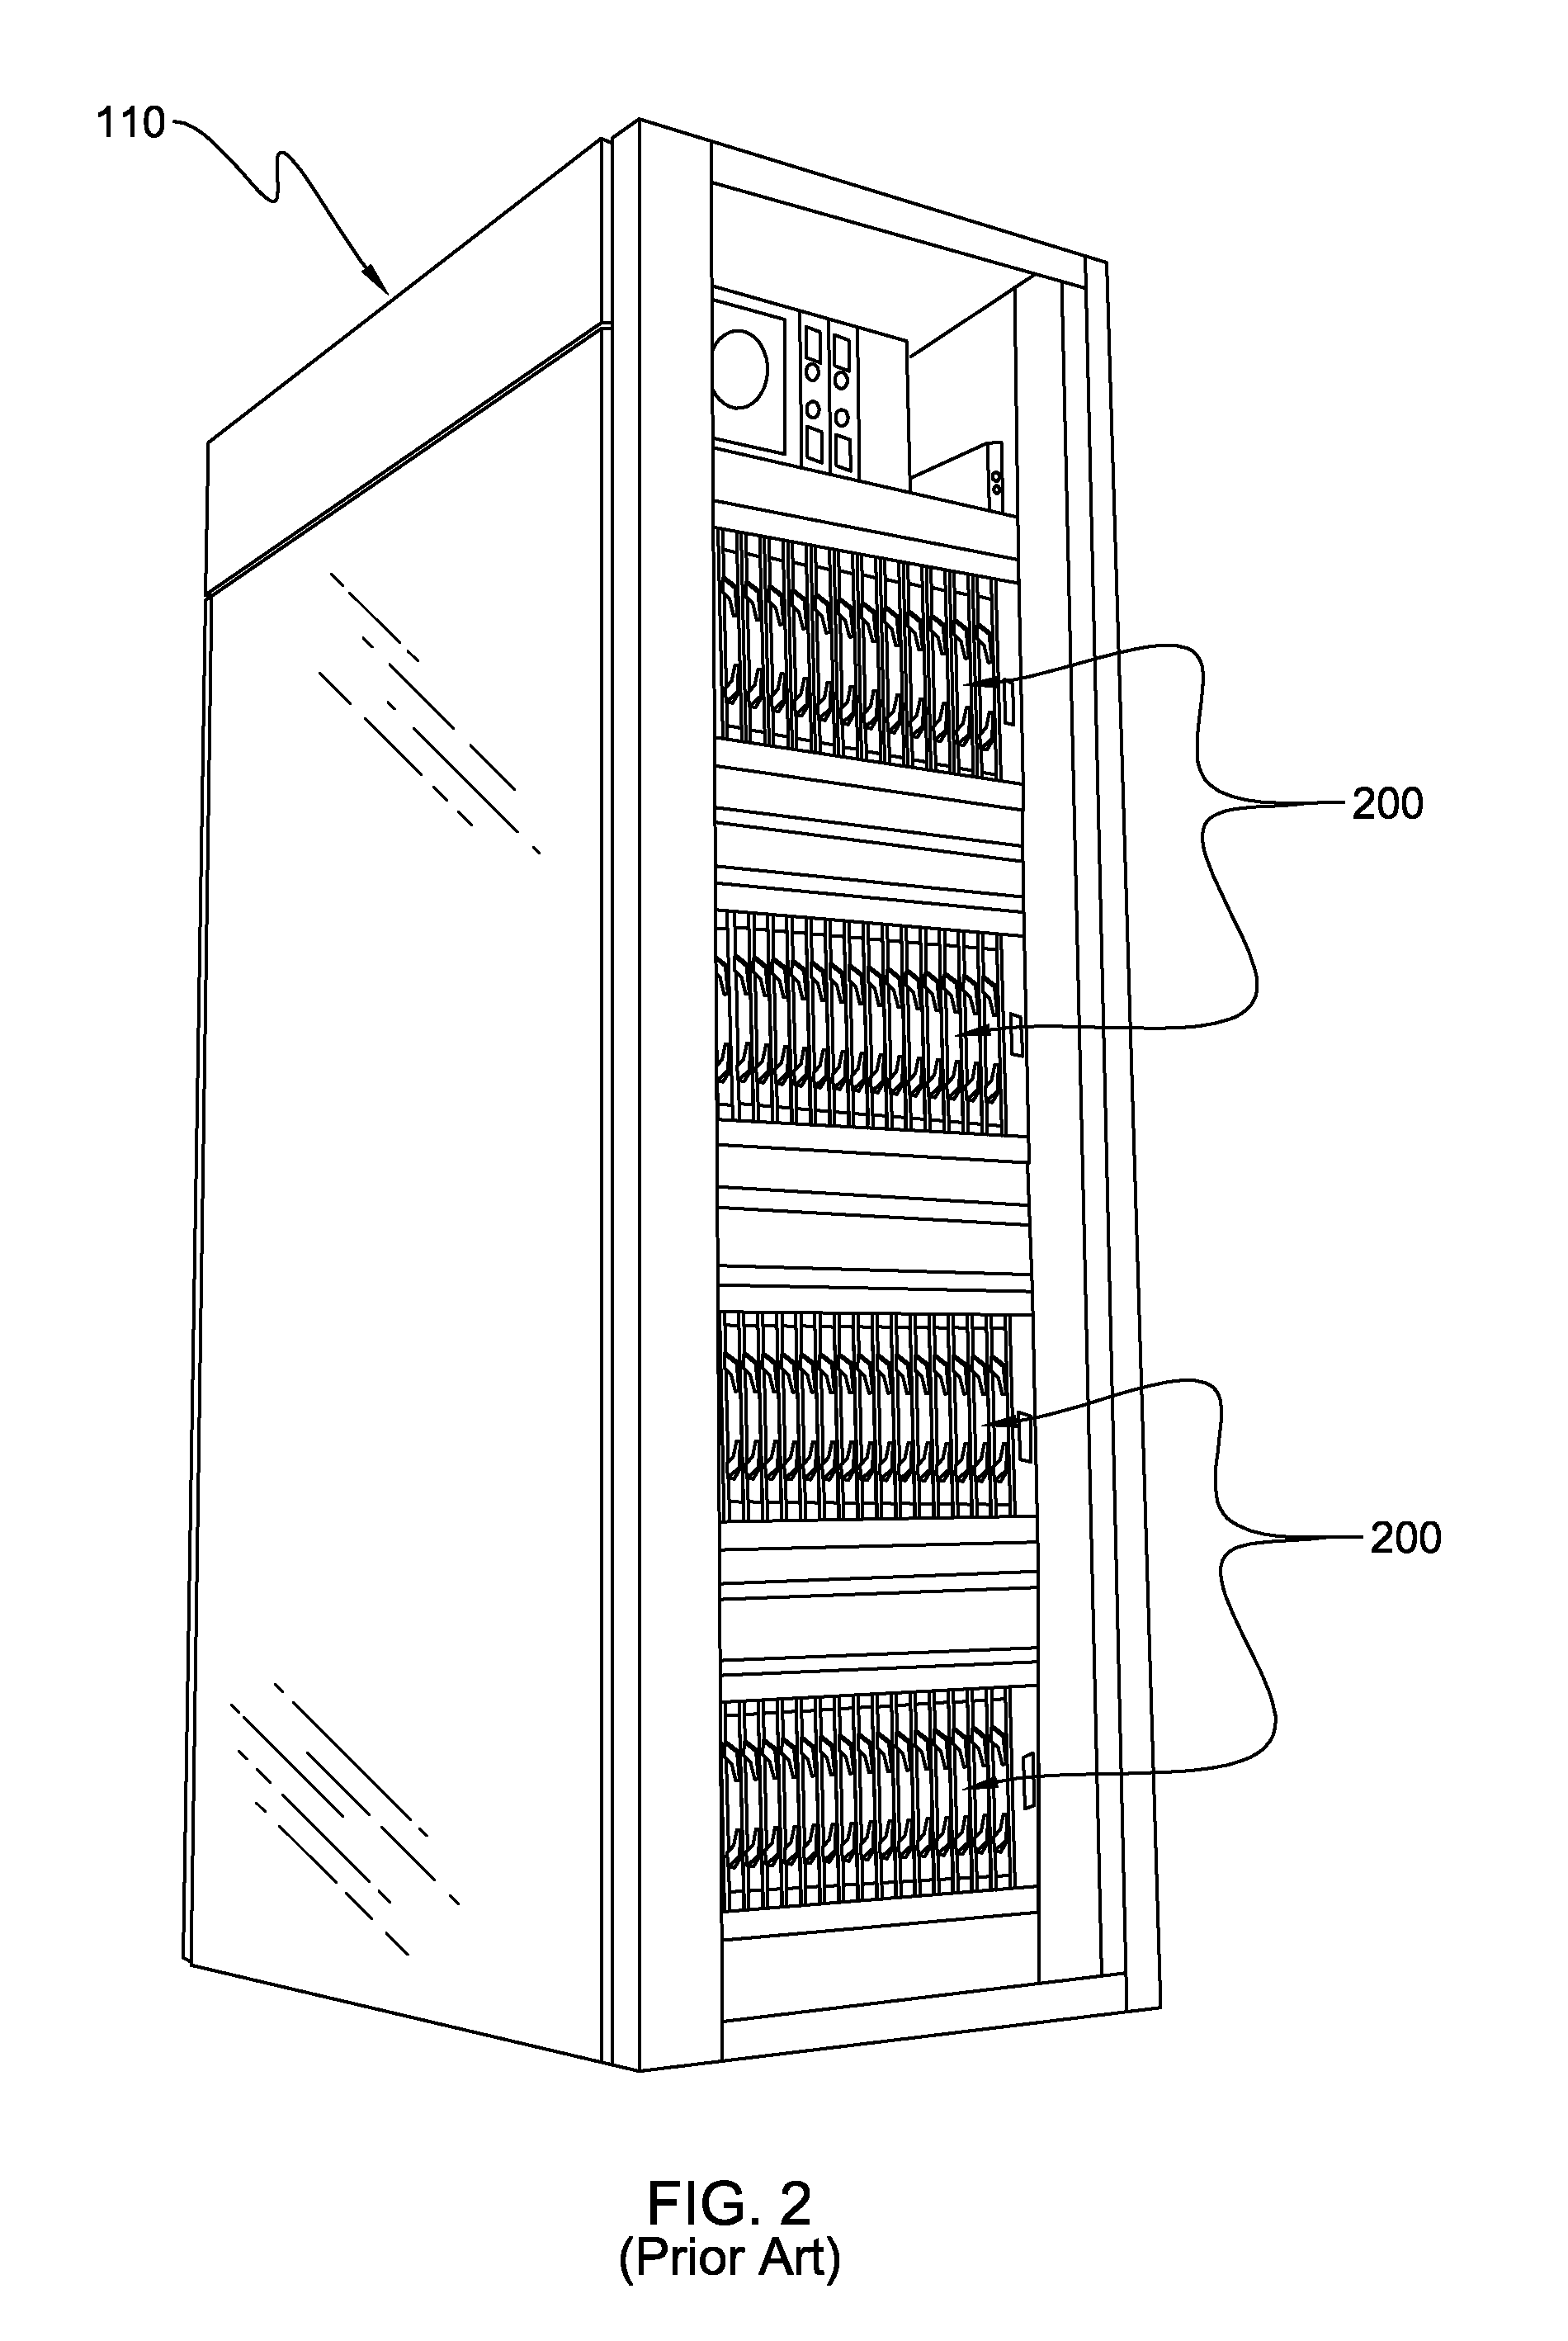 Apparatus and method for facilitating cooling of an electronics system